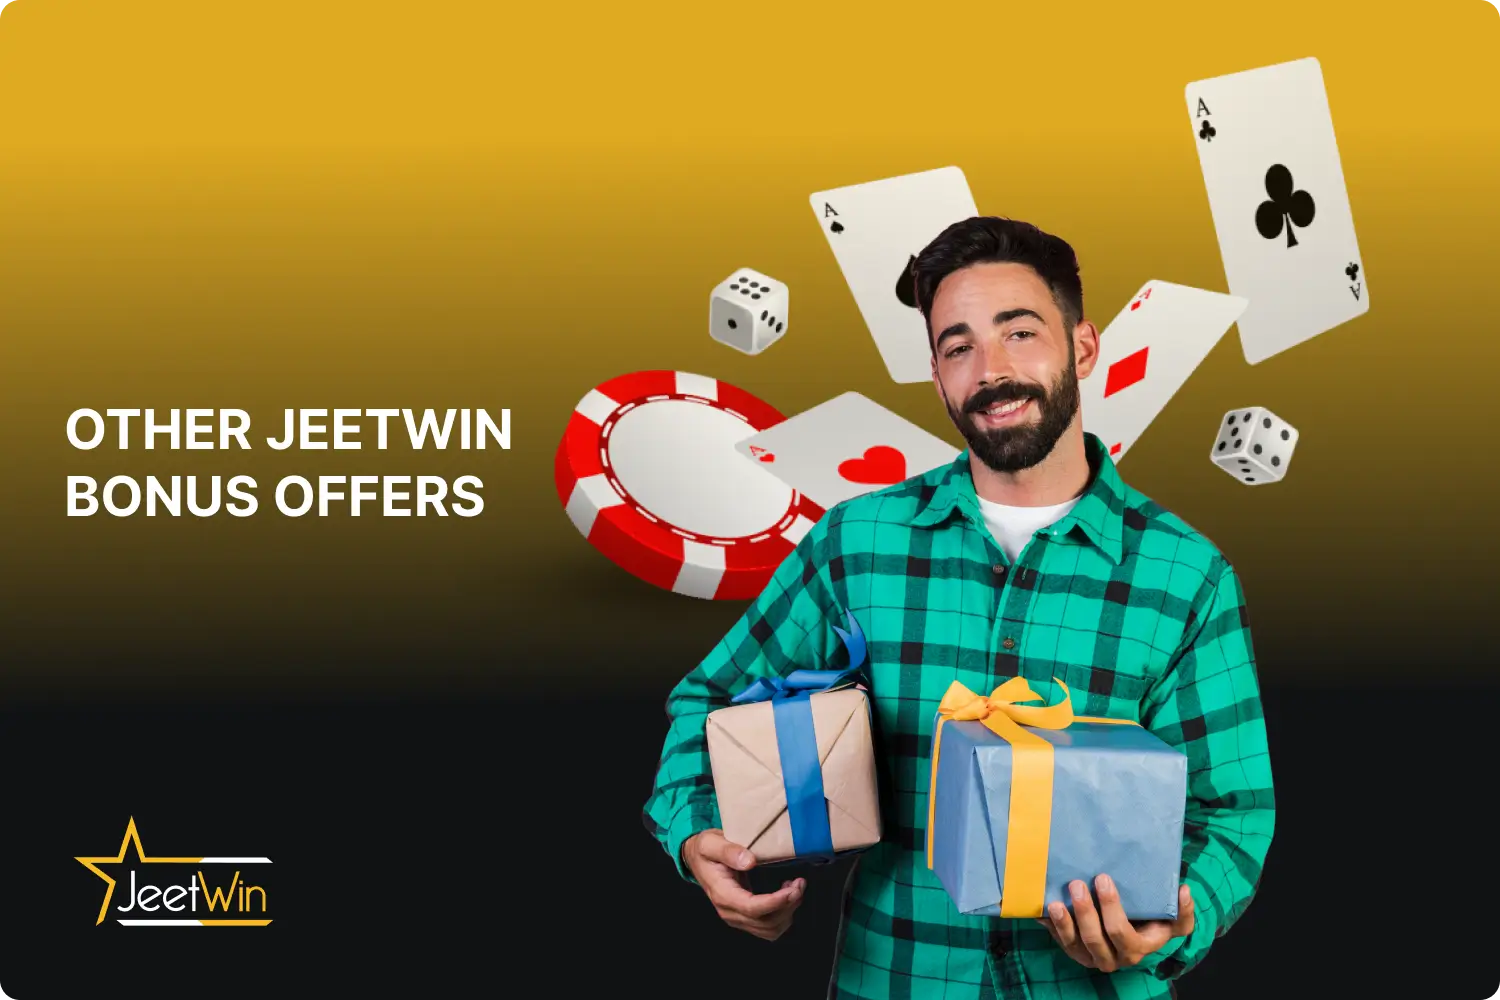 Jeetwin players in India not only have access to welcome gifts, but also other bonus offers for regular players